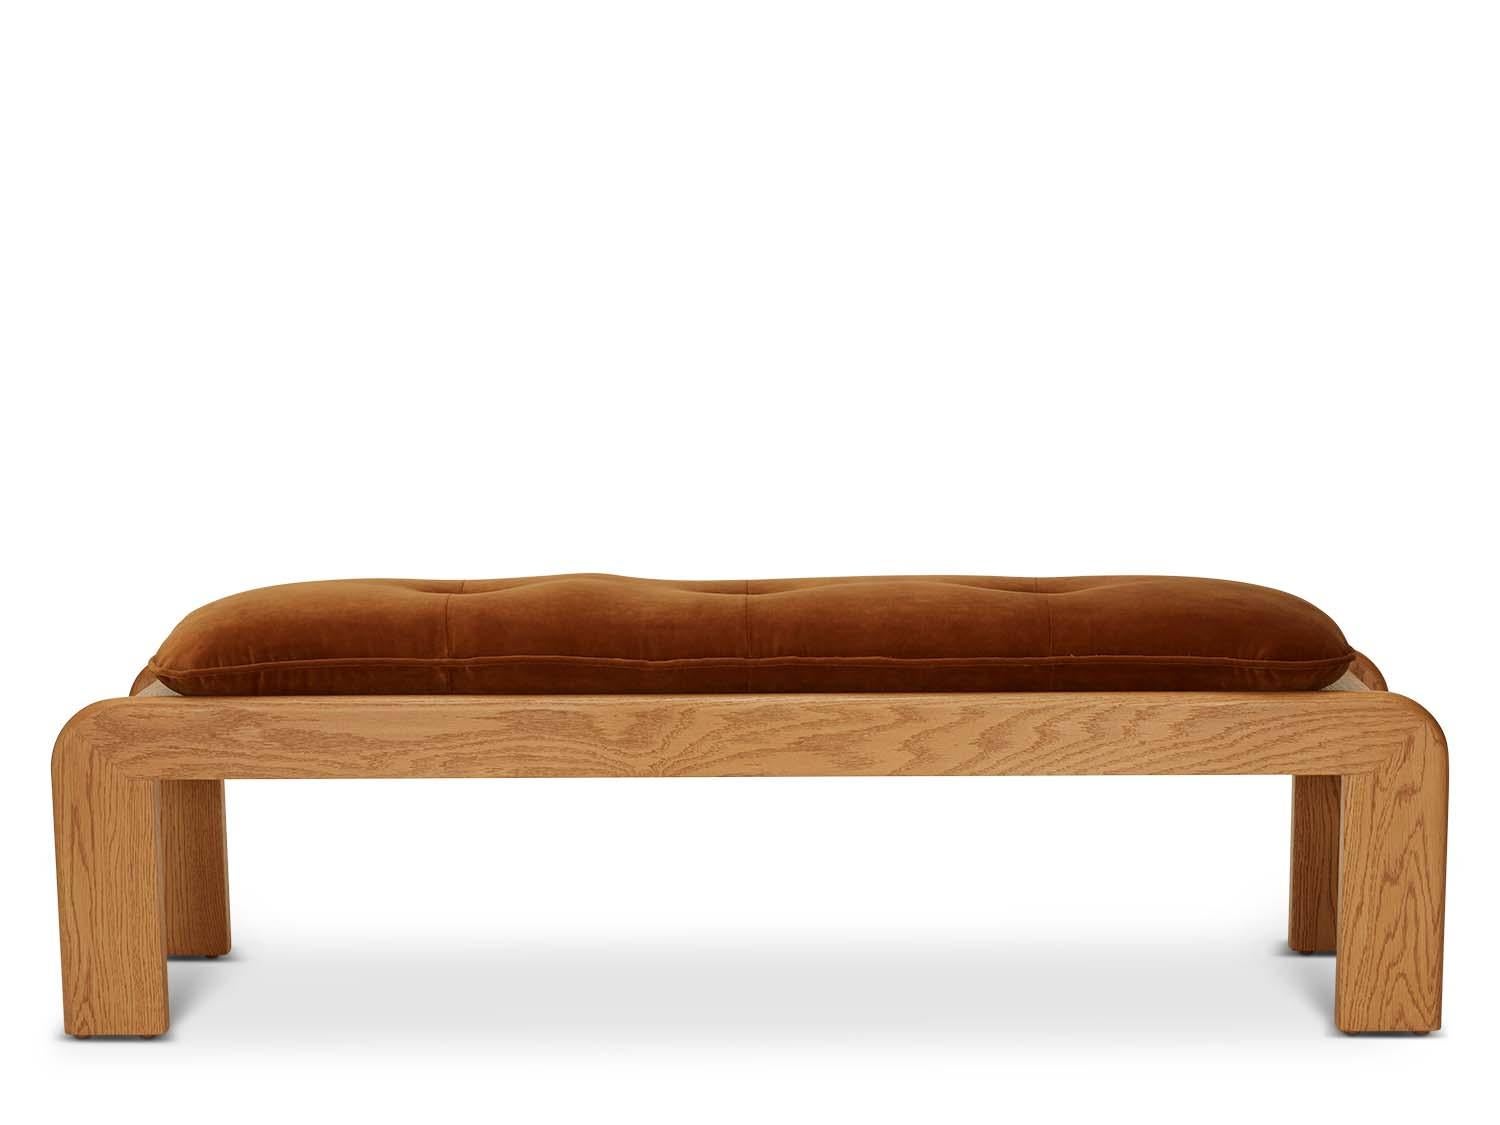 The Topa Bench features a handcrafted roundover frame and secured tufted cushion.

The Lawson-Fenning Collection is designed and handmade in Los Angeles, California. Reach out to discover what options are currently in stock.